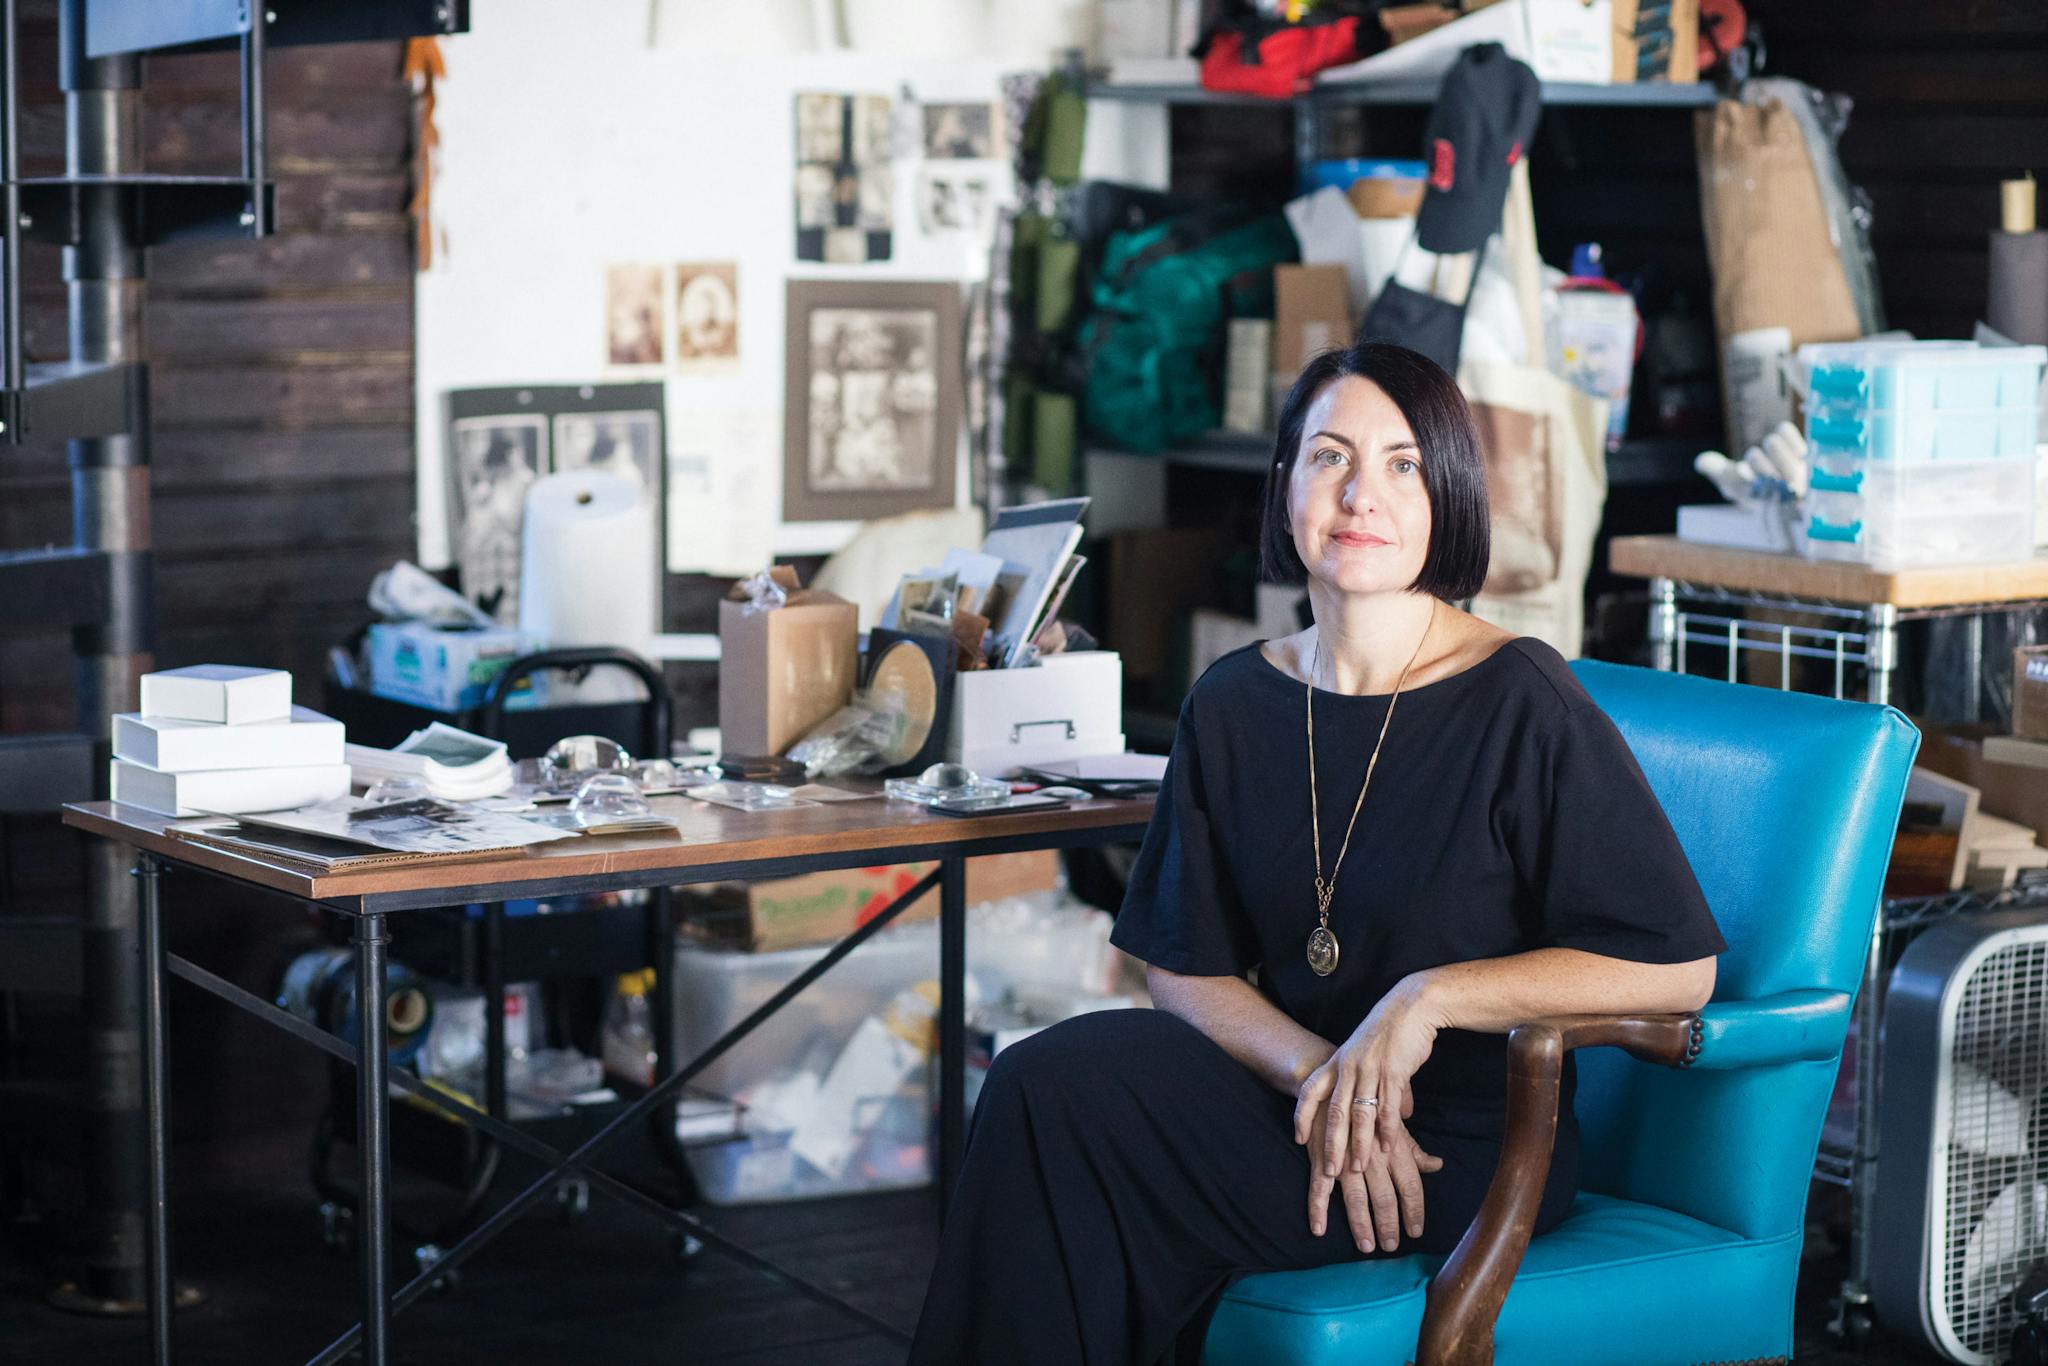 Toni Pepe inside her Malden studio, seated in a turquoise chair in front of a cluttered table.